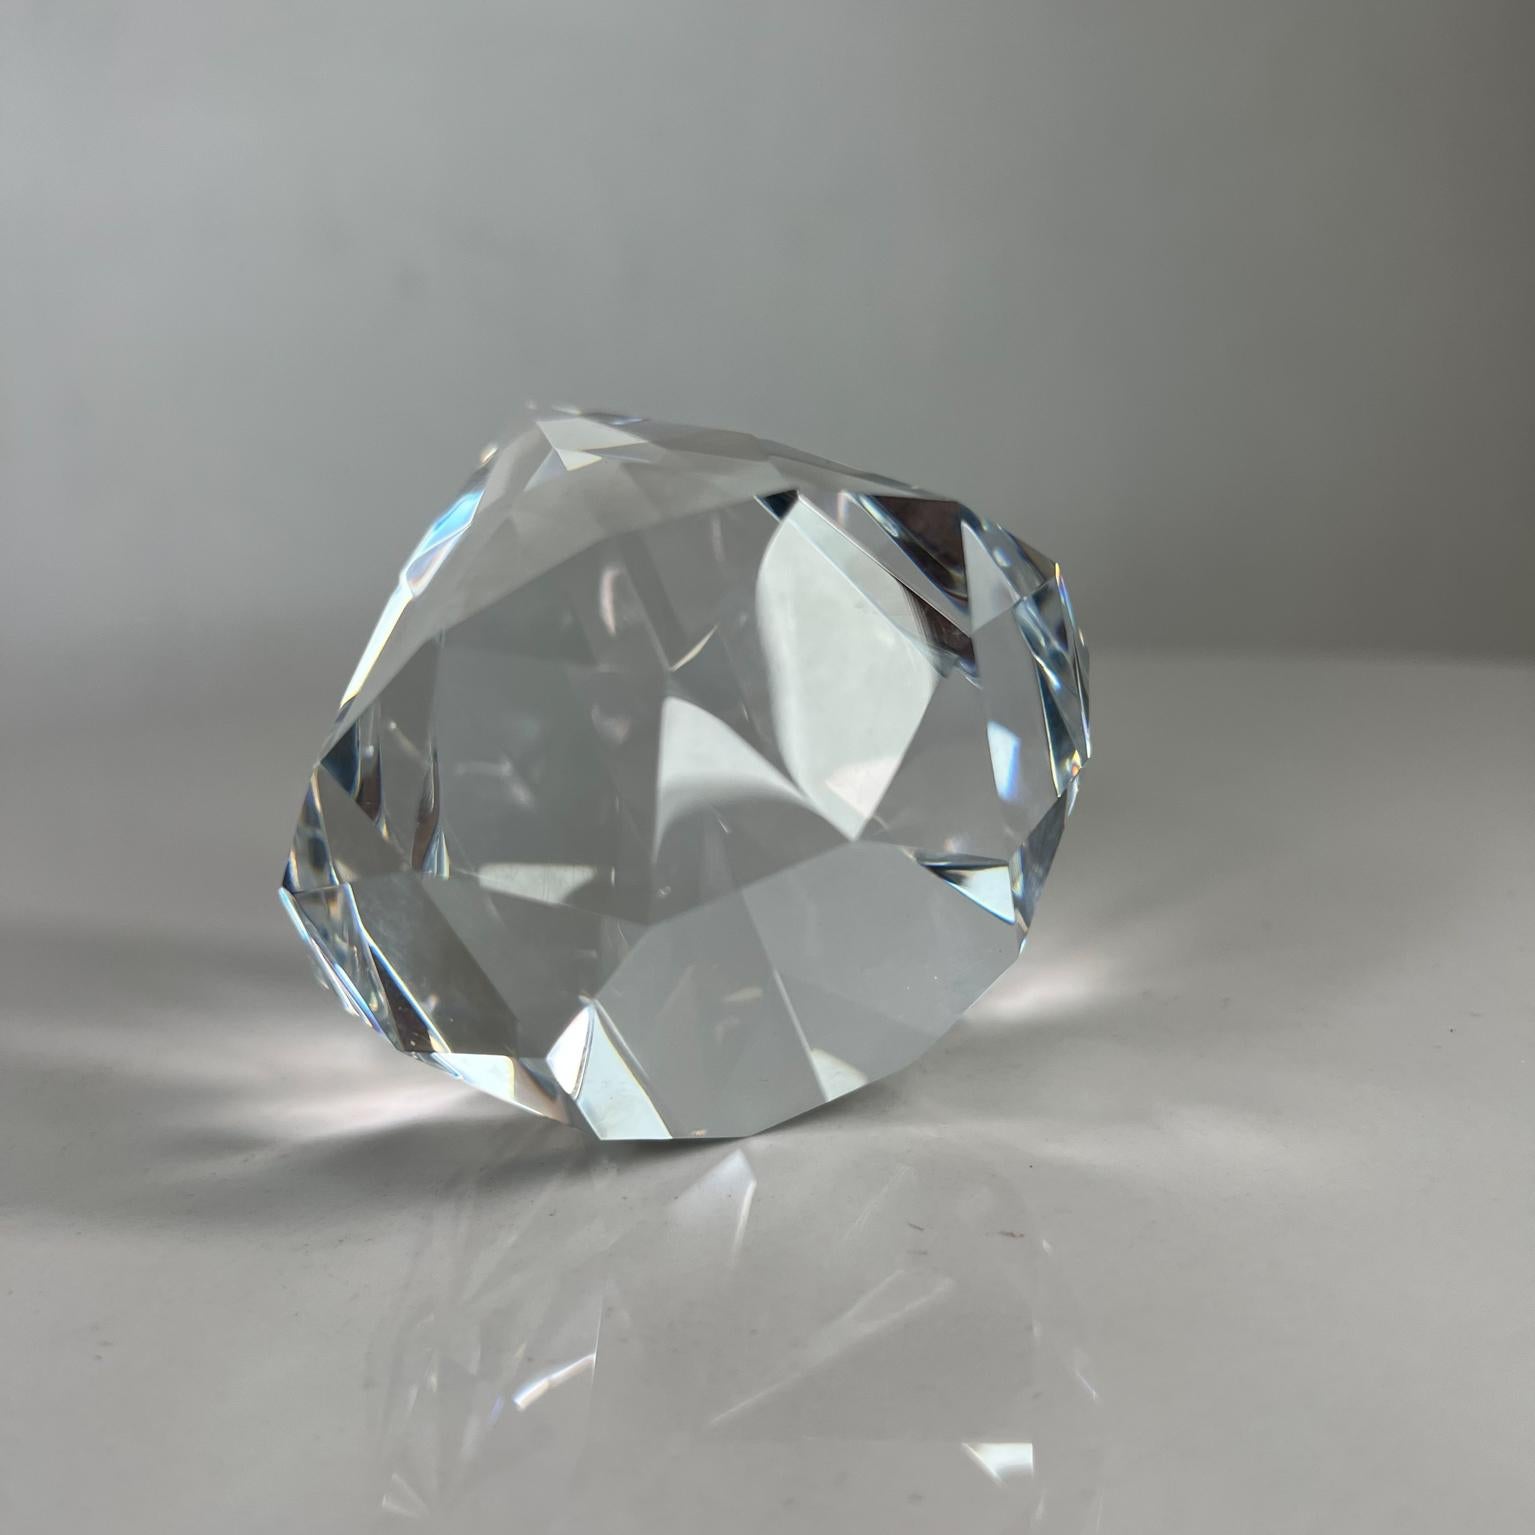 Tiffany & Co Crystal Art Glass Modern Faceted Diamond Paperweight Sculpture 2